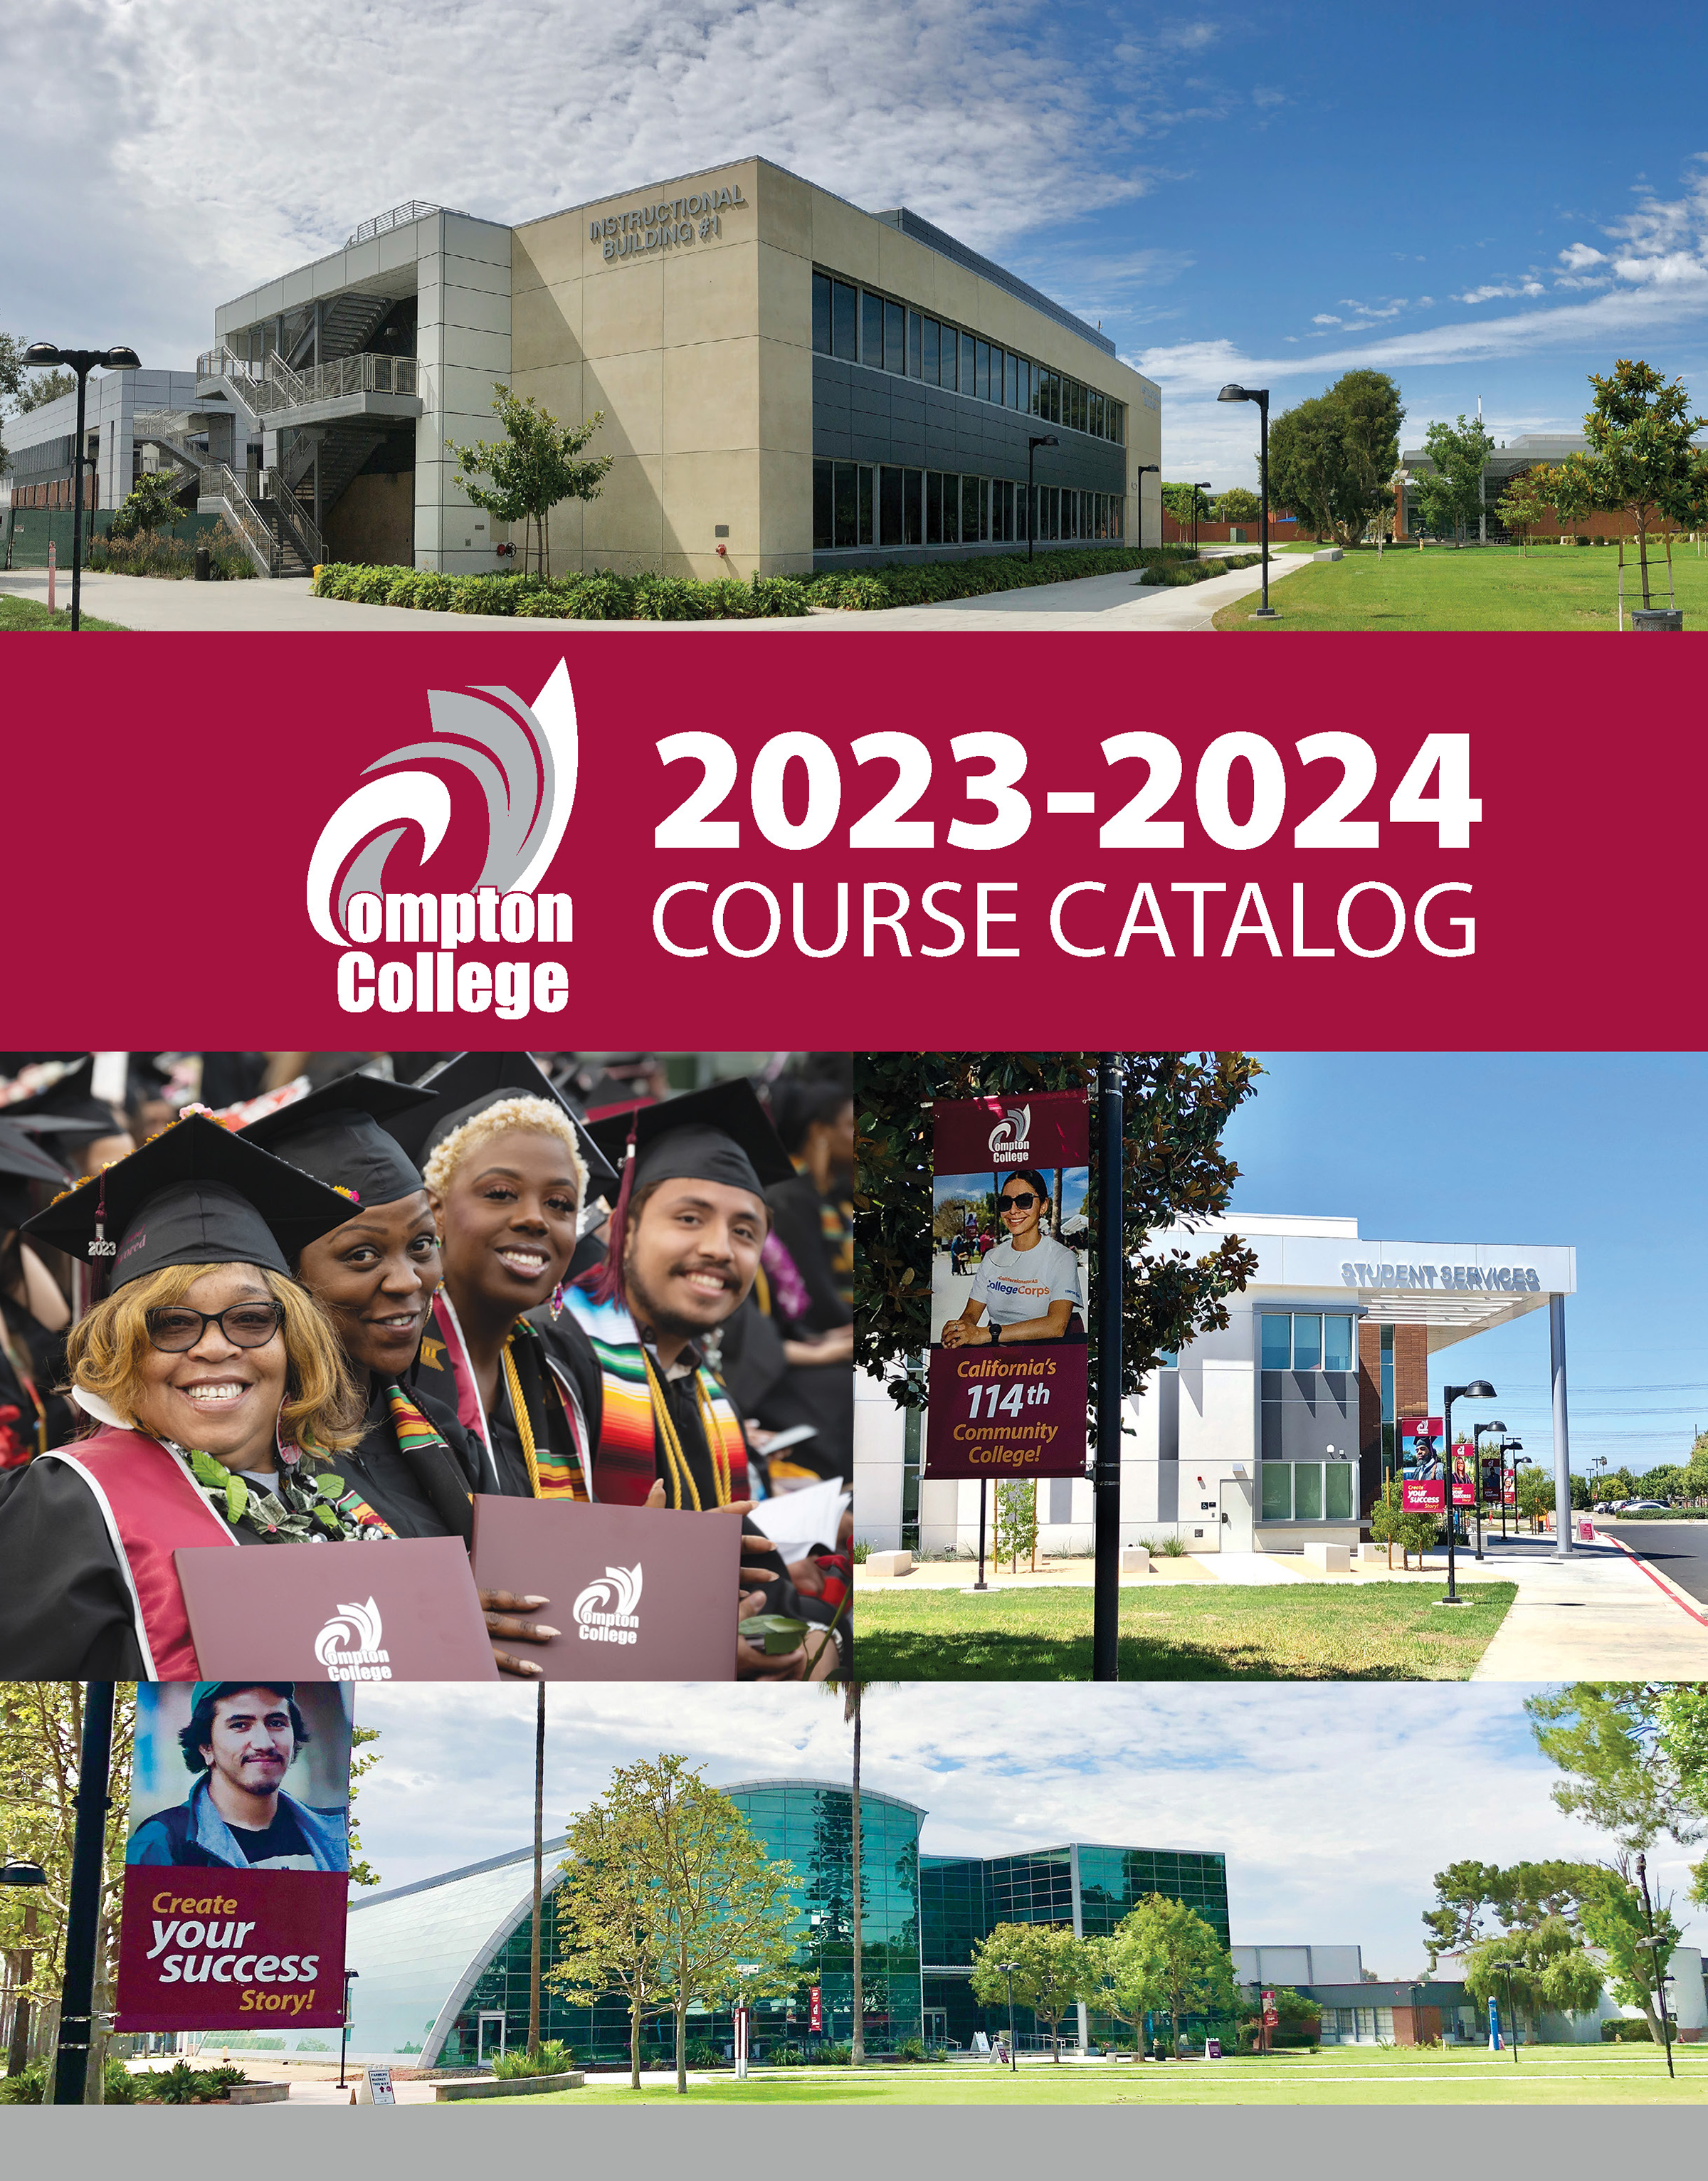 Compton College 2023-2024 Course Catalog title page